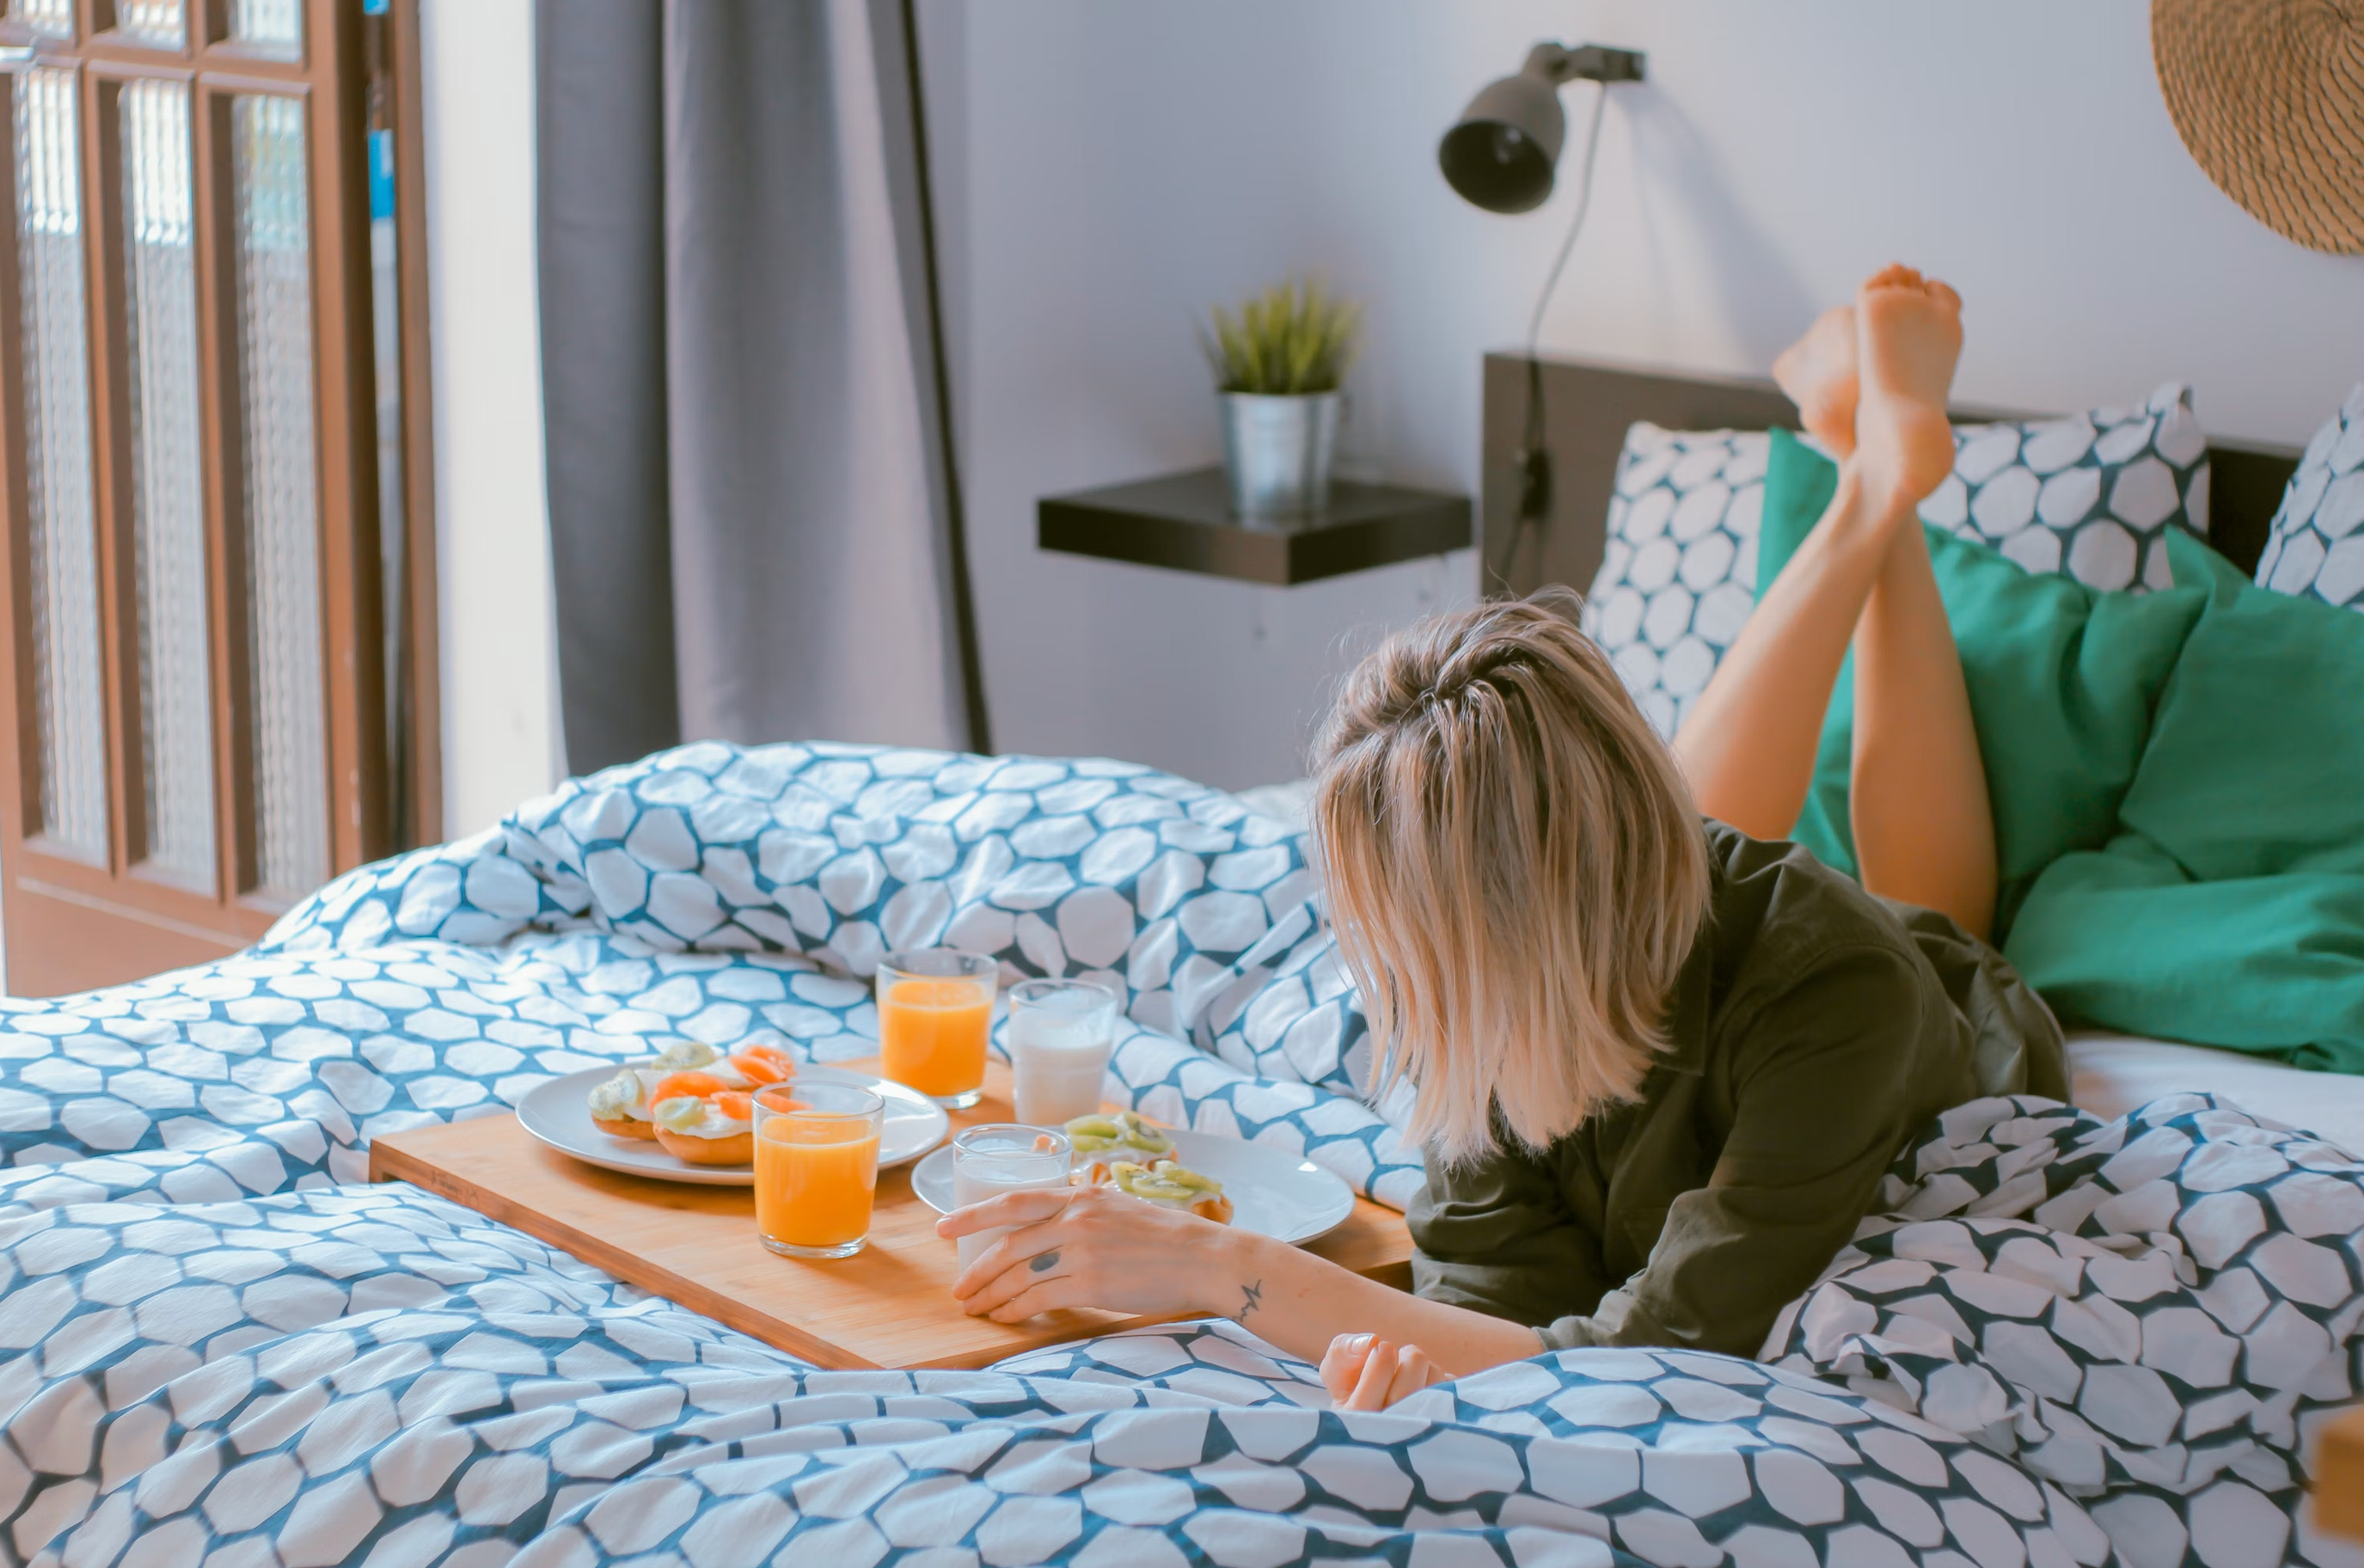 A woman with blond hair enjoying breakfast in bed with orange juice in a well-light, clean bedroom